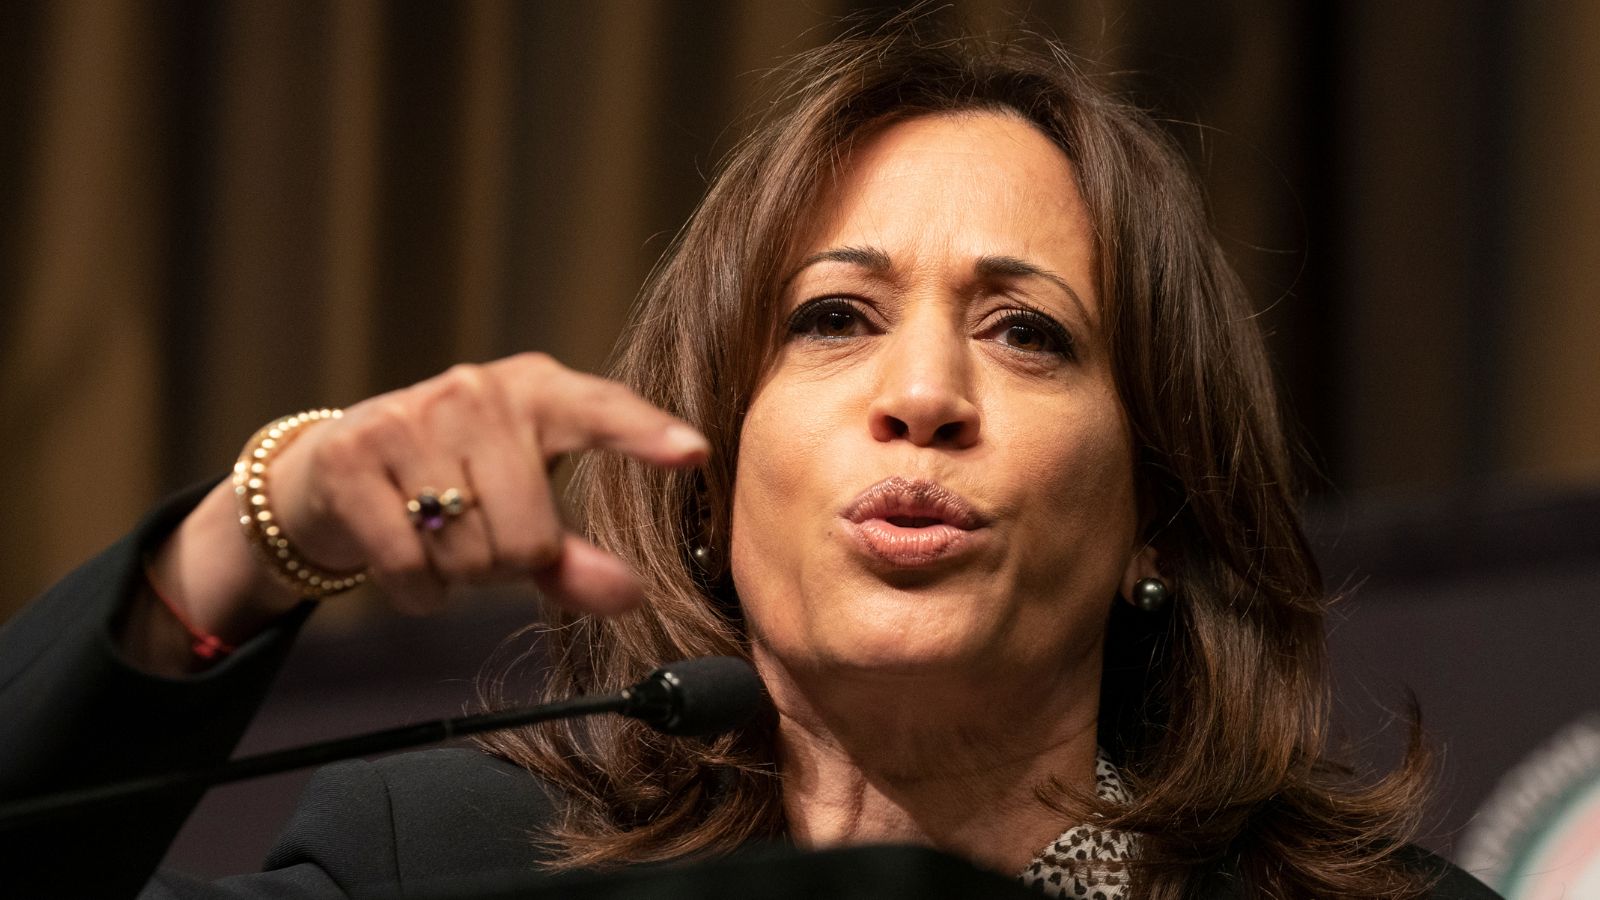 “Nice Gas Stove You Got There”: Vice President Kamala Grilled Over Gas Stove in Holiday Photo